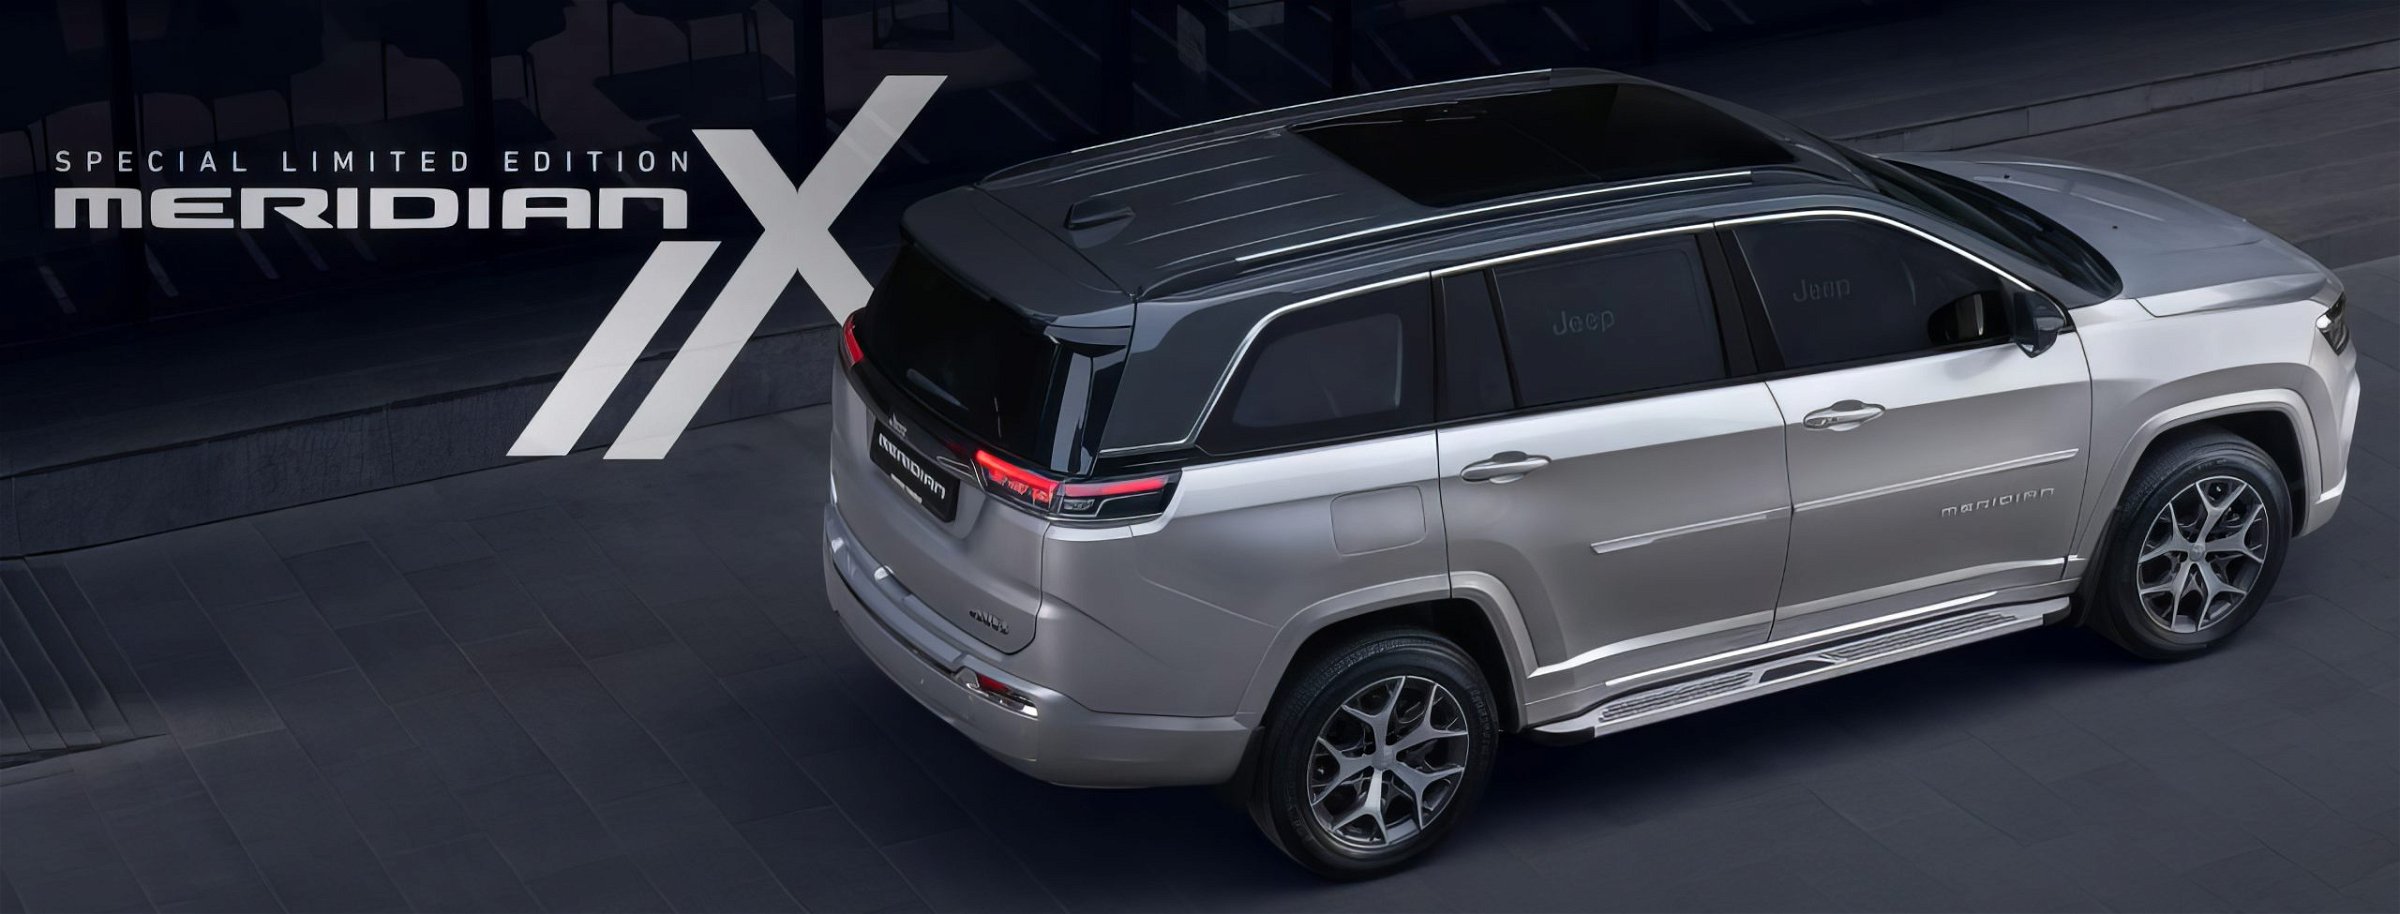 Jeep Meridian X Re-Launched Due To Demand